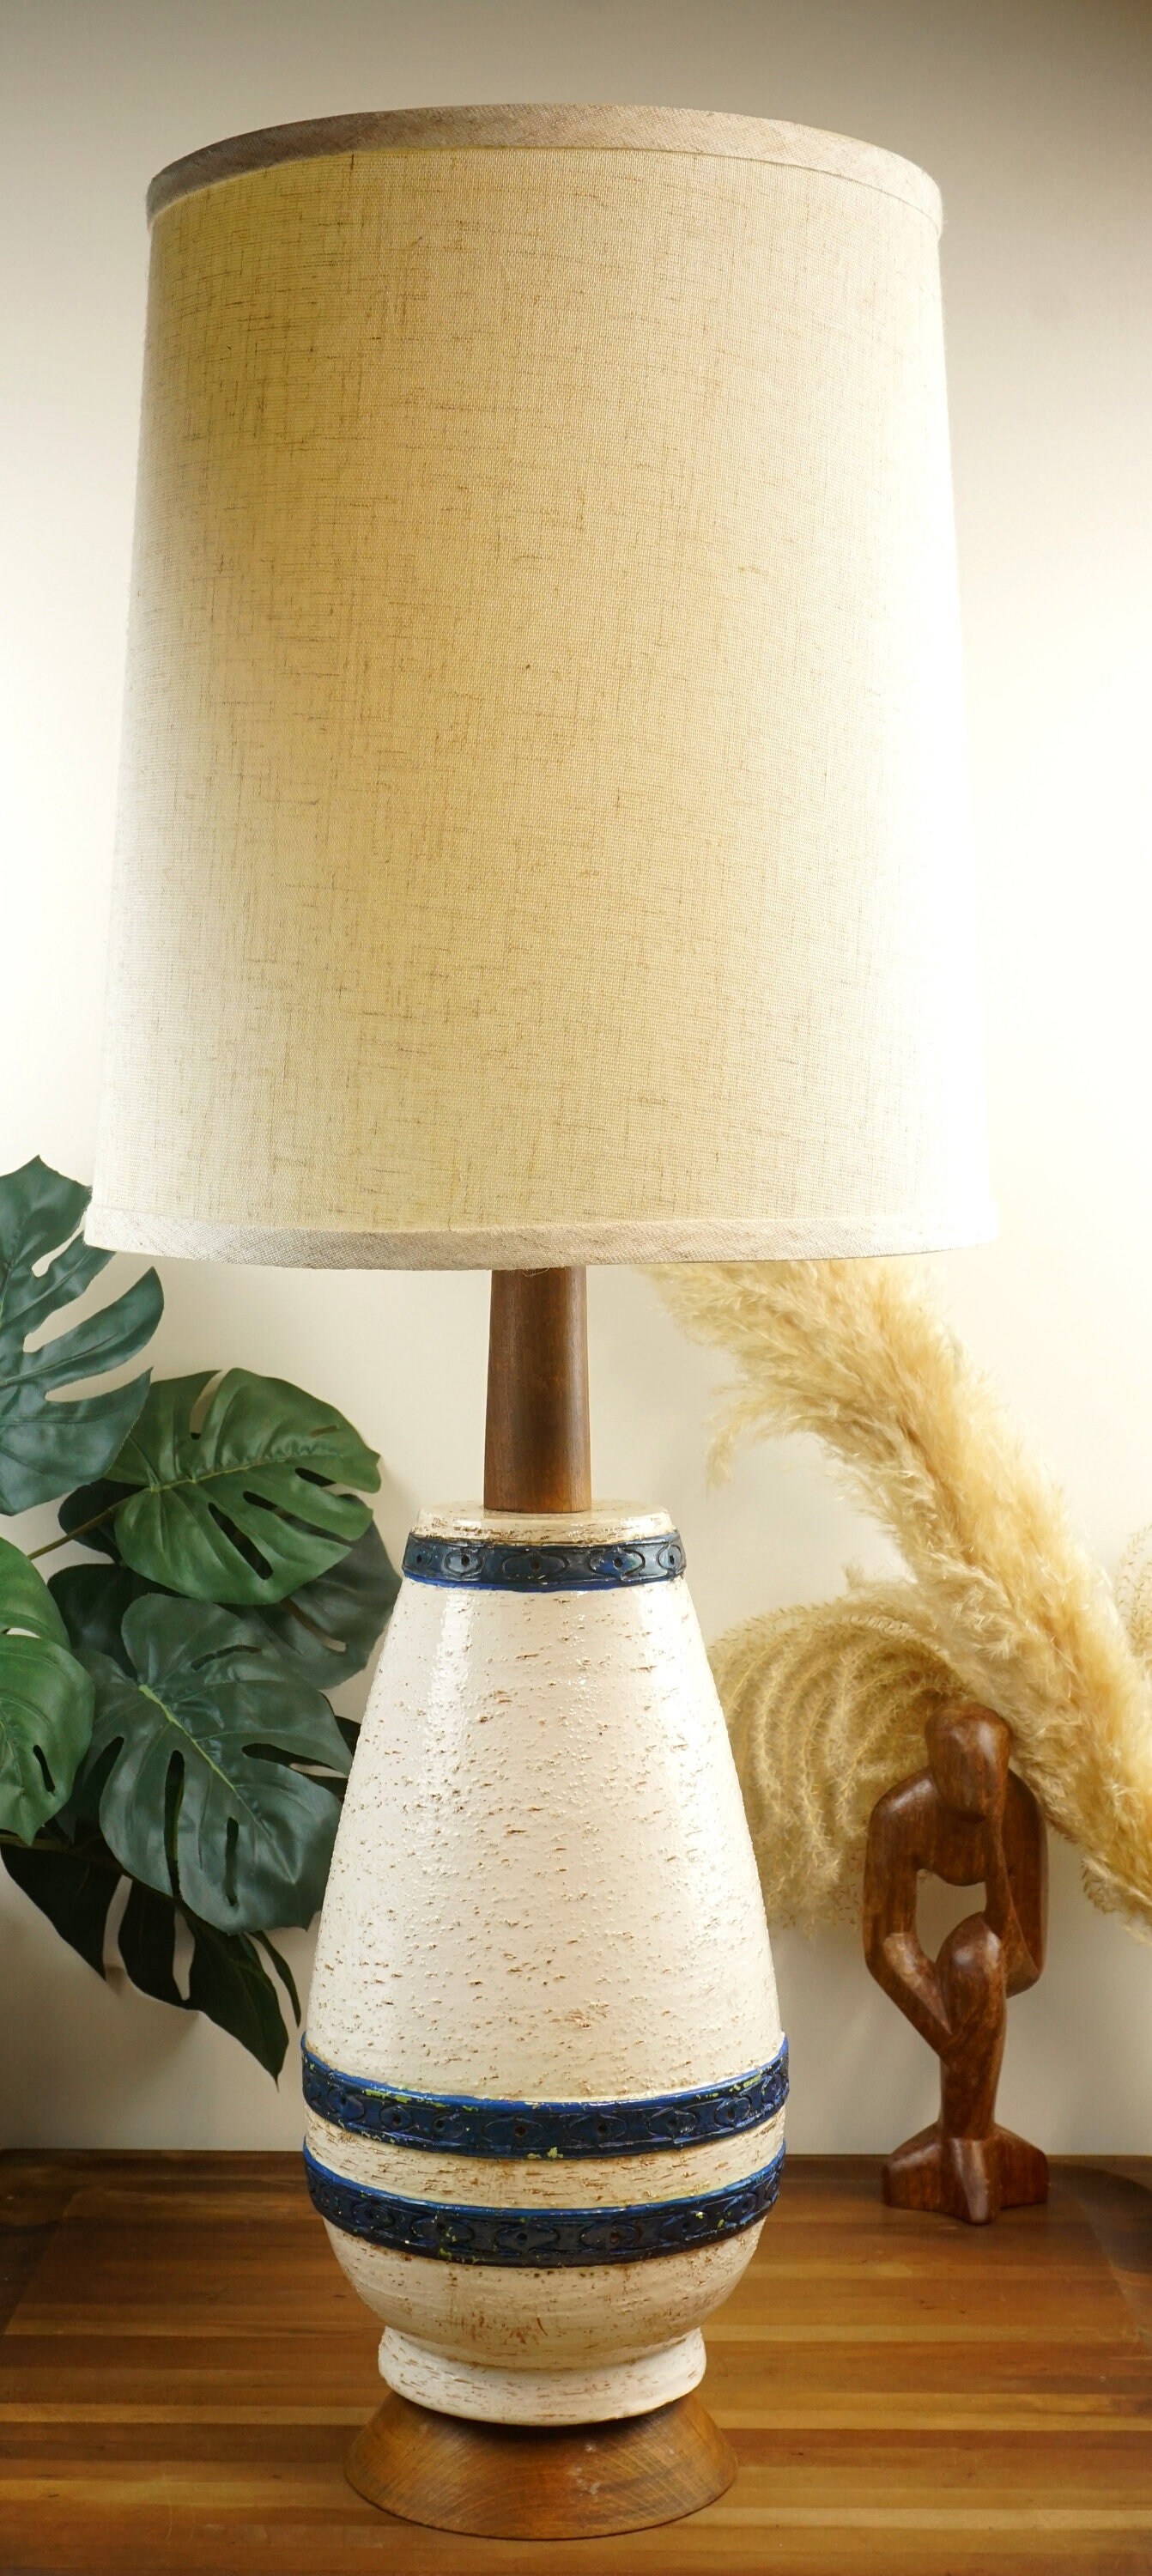 s Table Lamp   Etsy